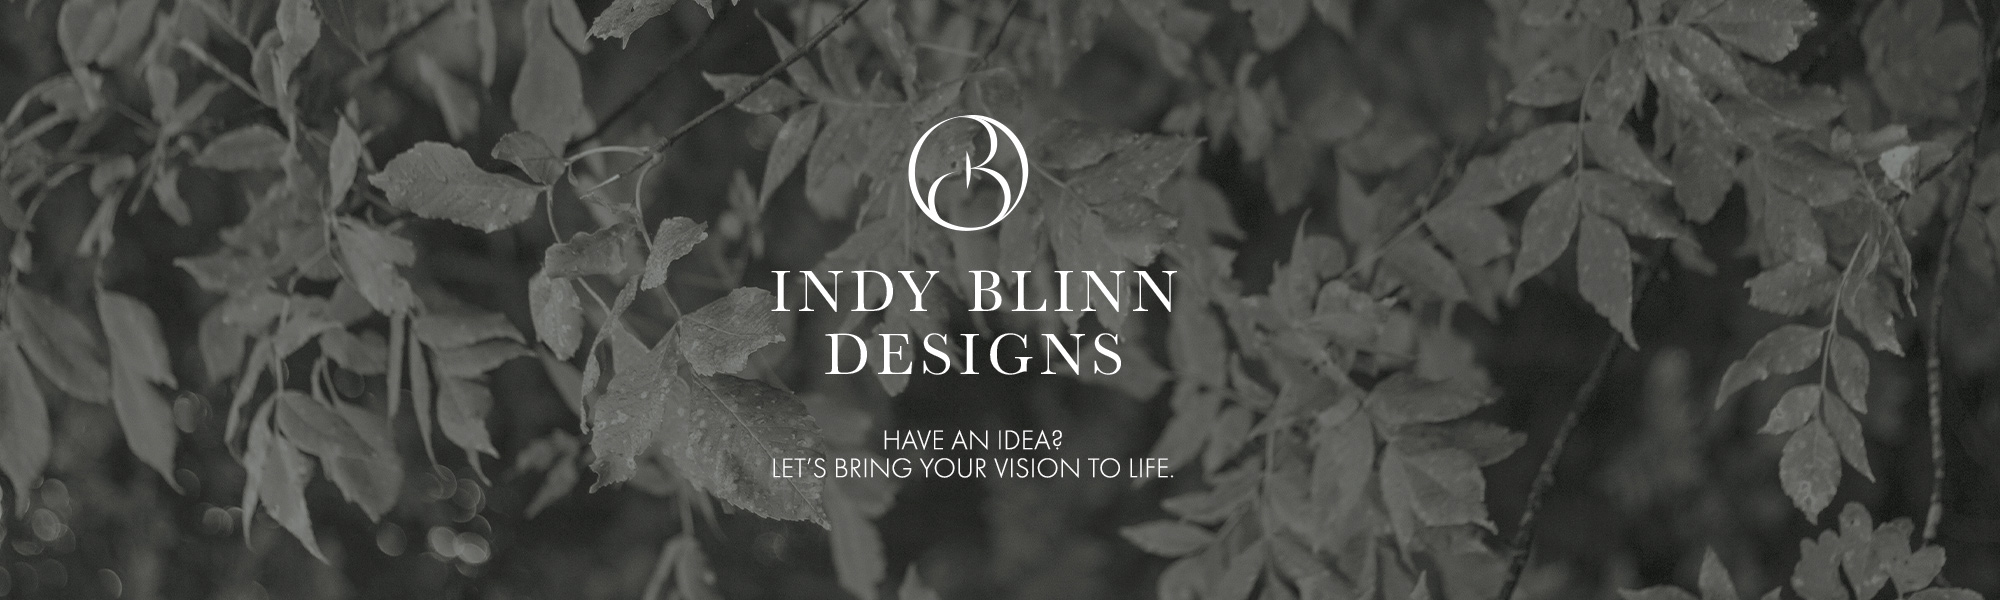 Banner with leaves in the background. Logo for Indy Blinn Designs is displayed overtop.